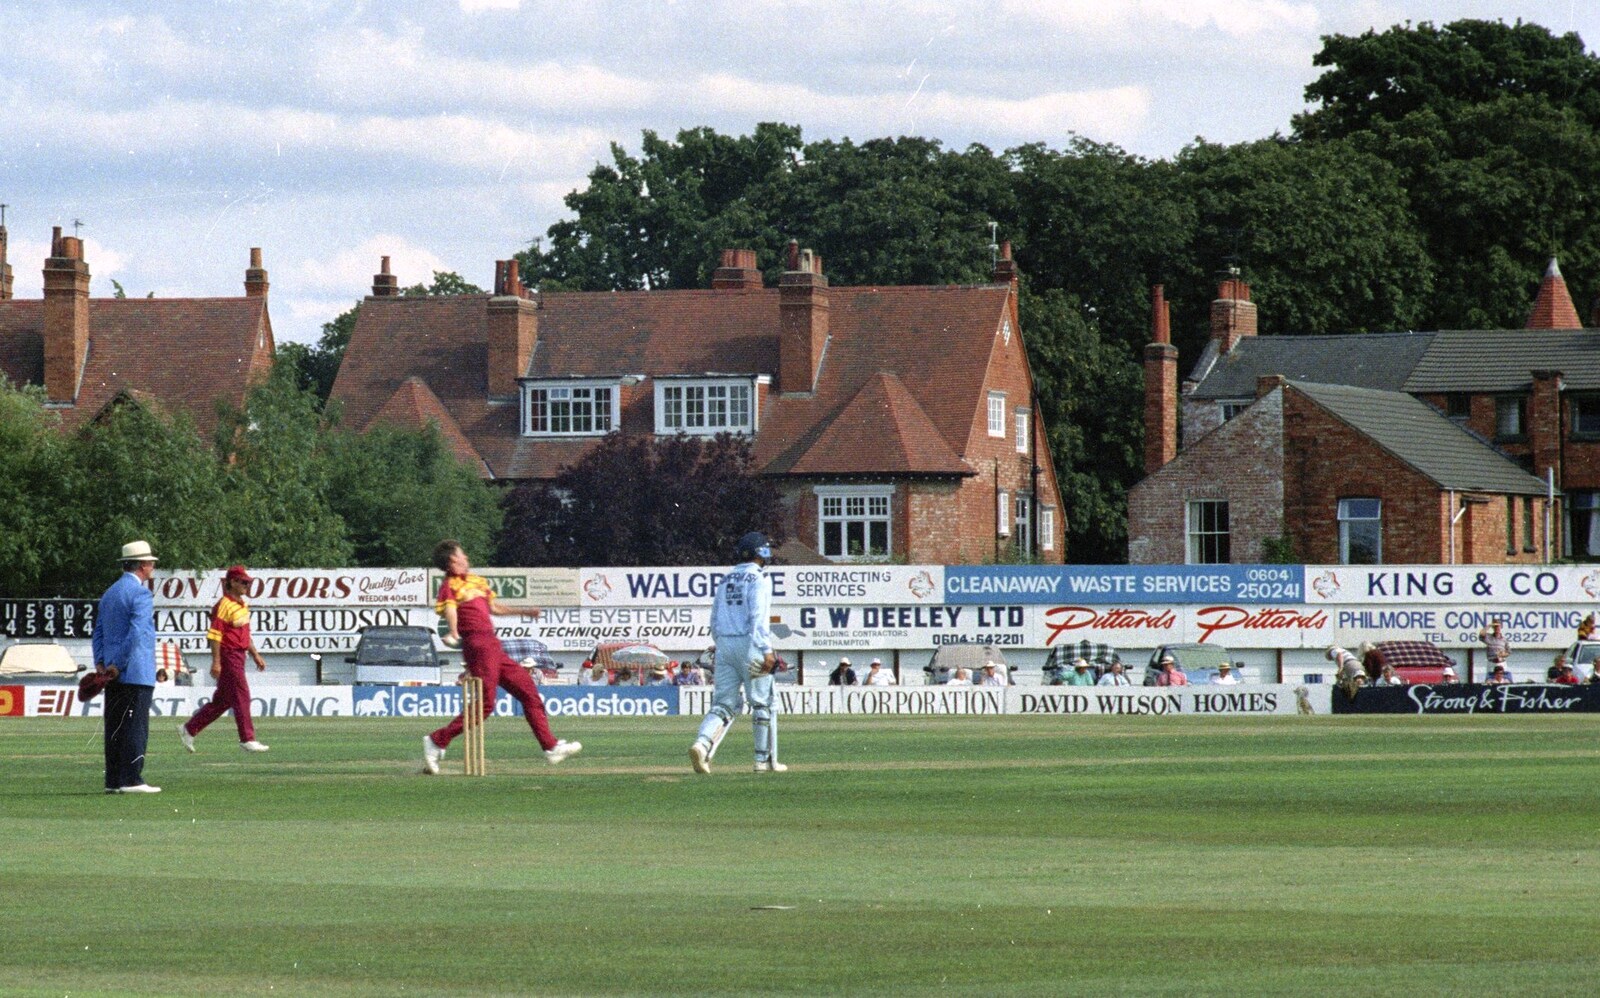 A Spot of Cricket, Northampton - 5th September 1994: Bowling action